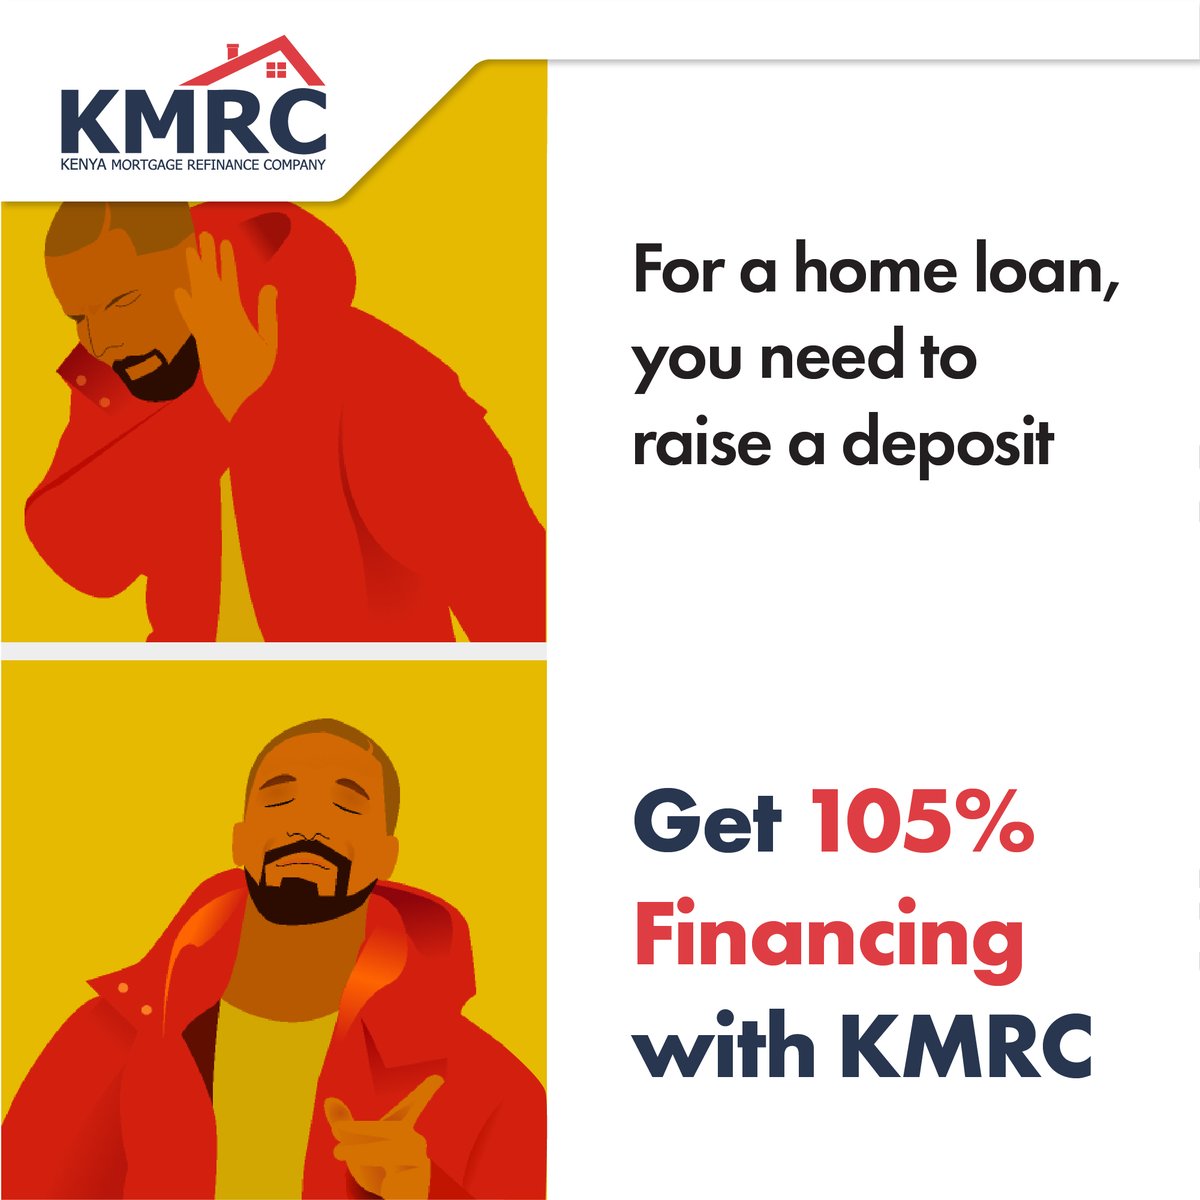 No deposit for your #homeloan? 
Haina waas! Get up to 105% financing for your #homeloan with @kmrc_co  and realize that dream today.....